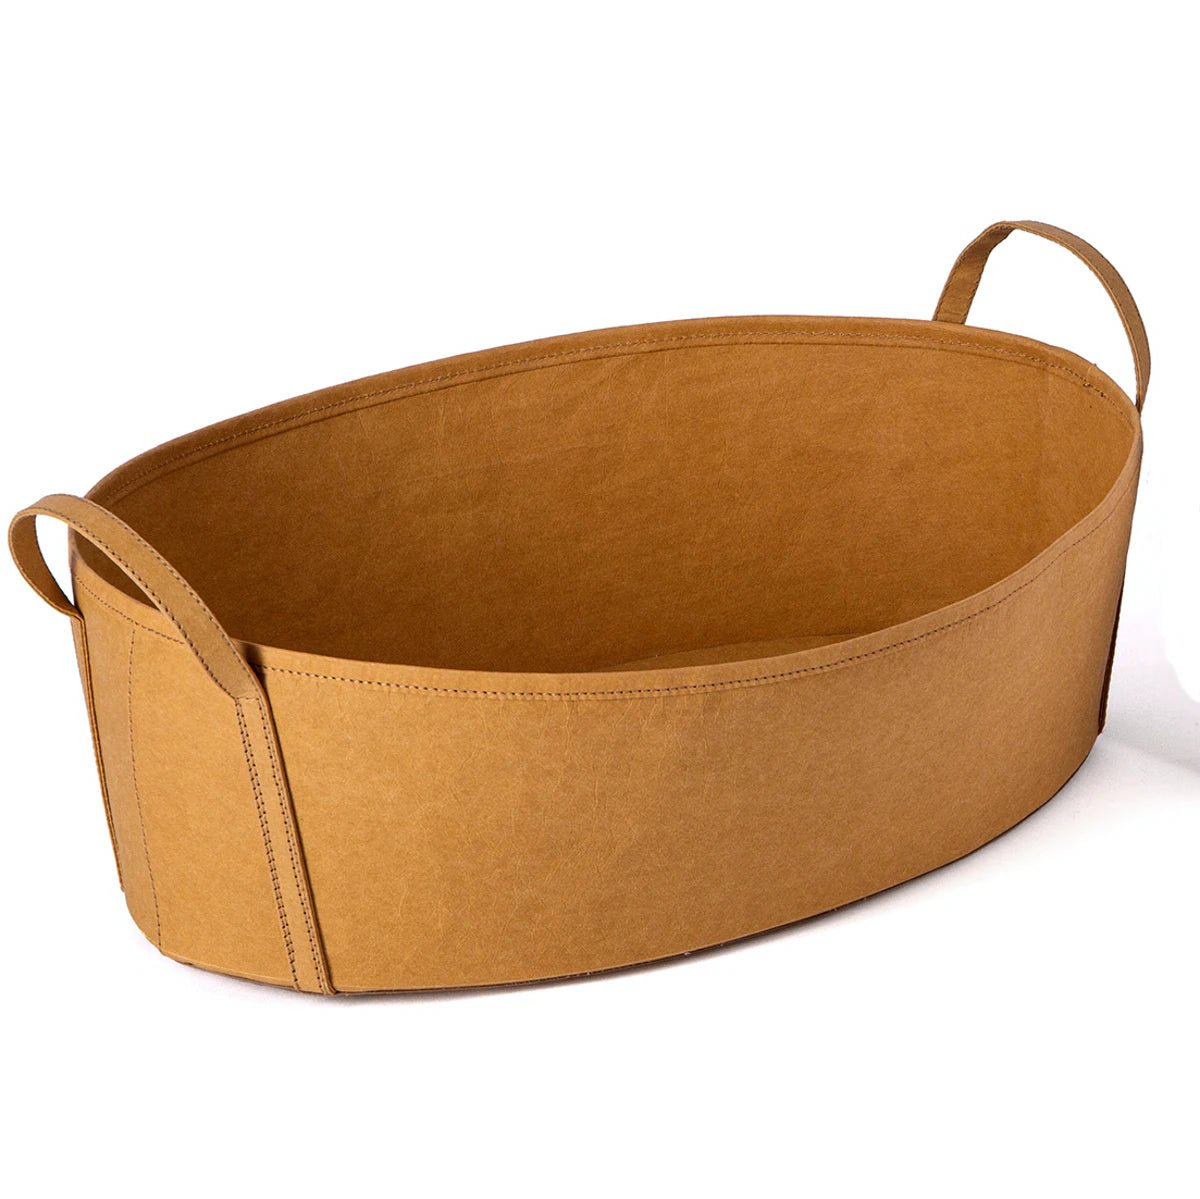 A tan washable paper storage basket is shown from a 3/4 angle, with a handle at each side.